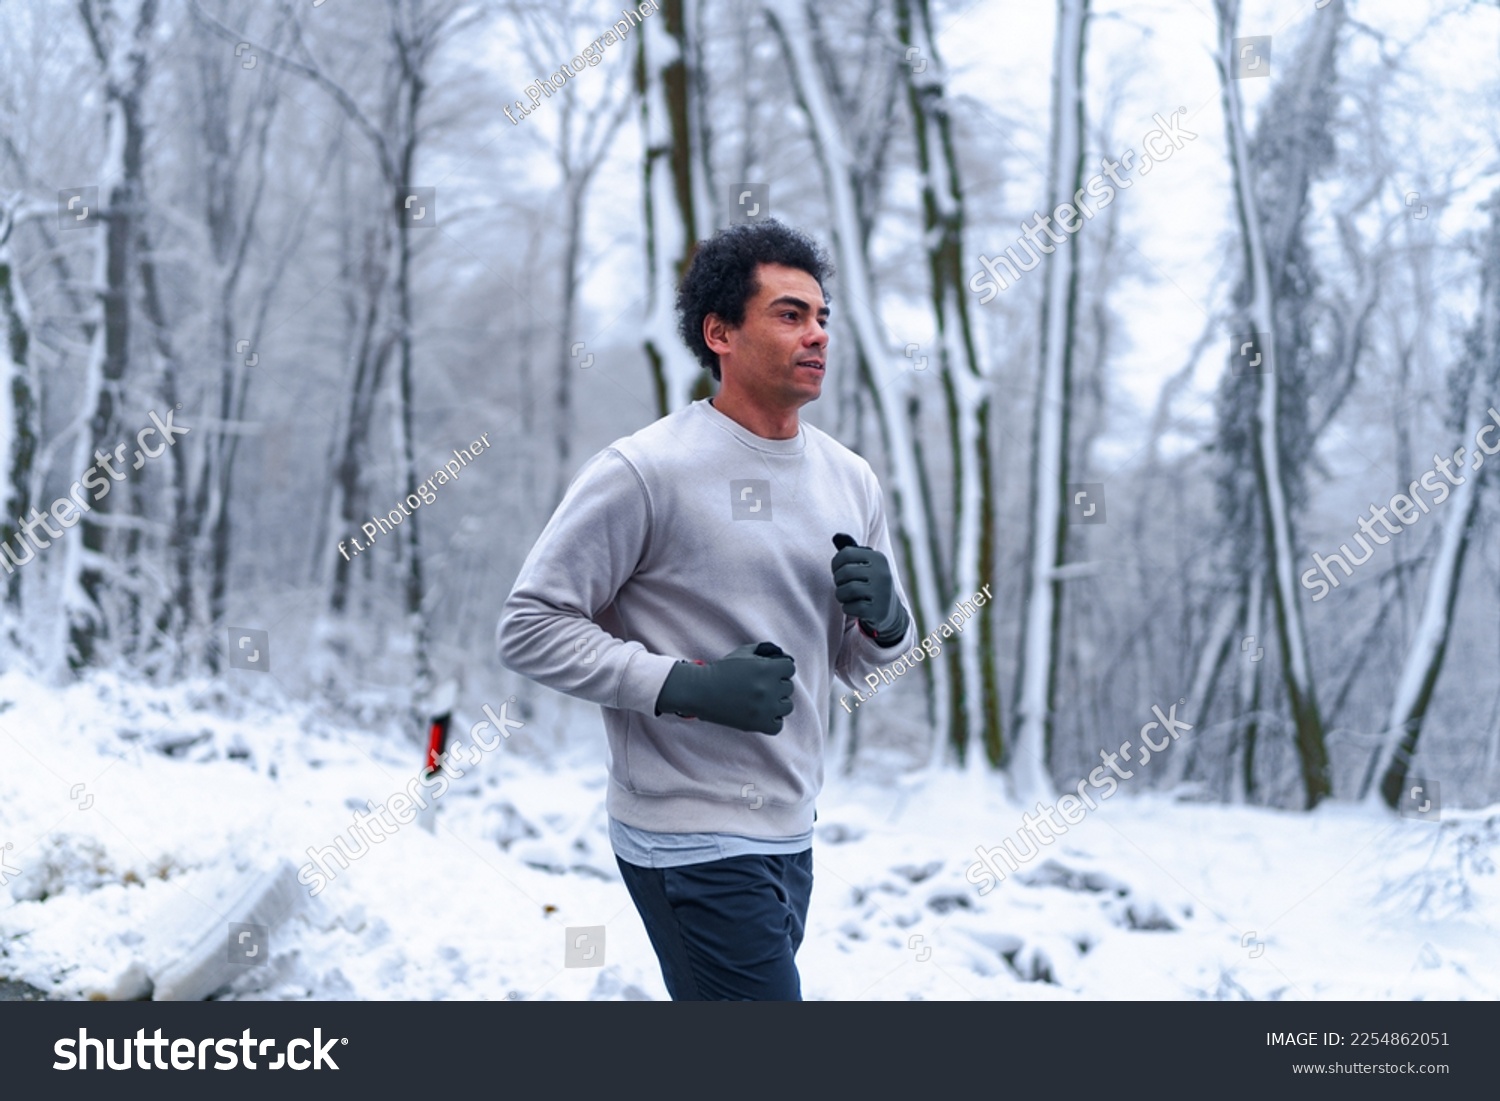 Man jogging in winter, surrounded by nature covered in snow. #2254862051